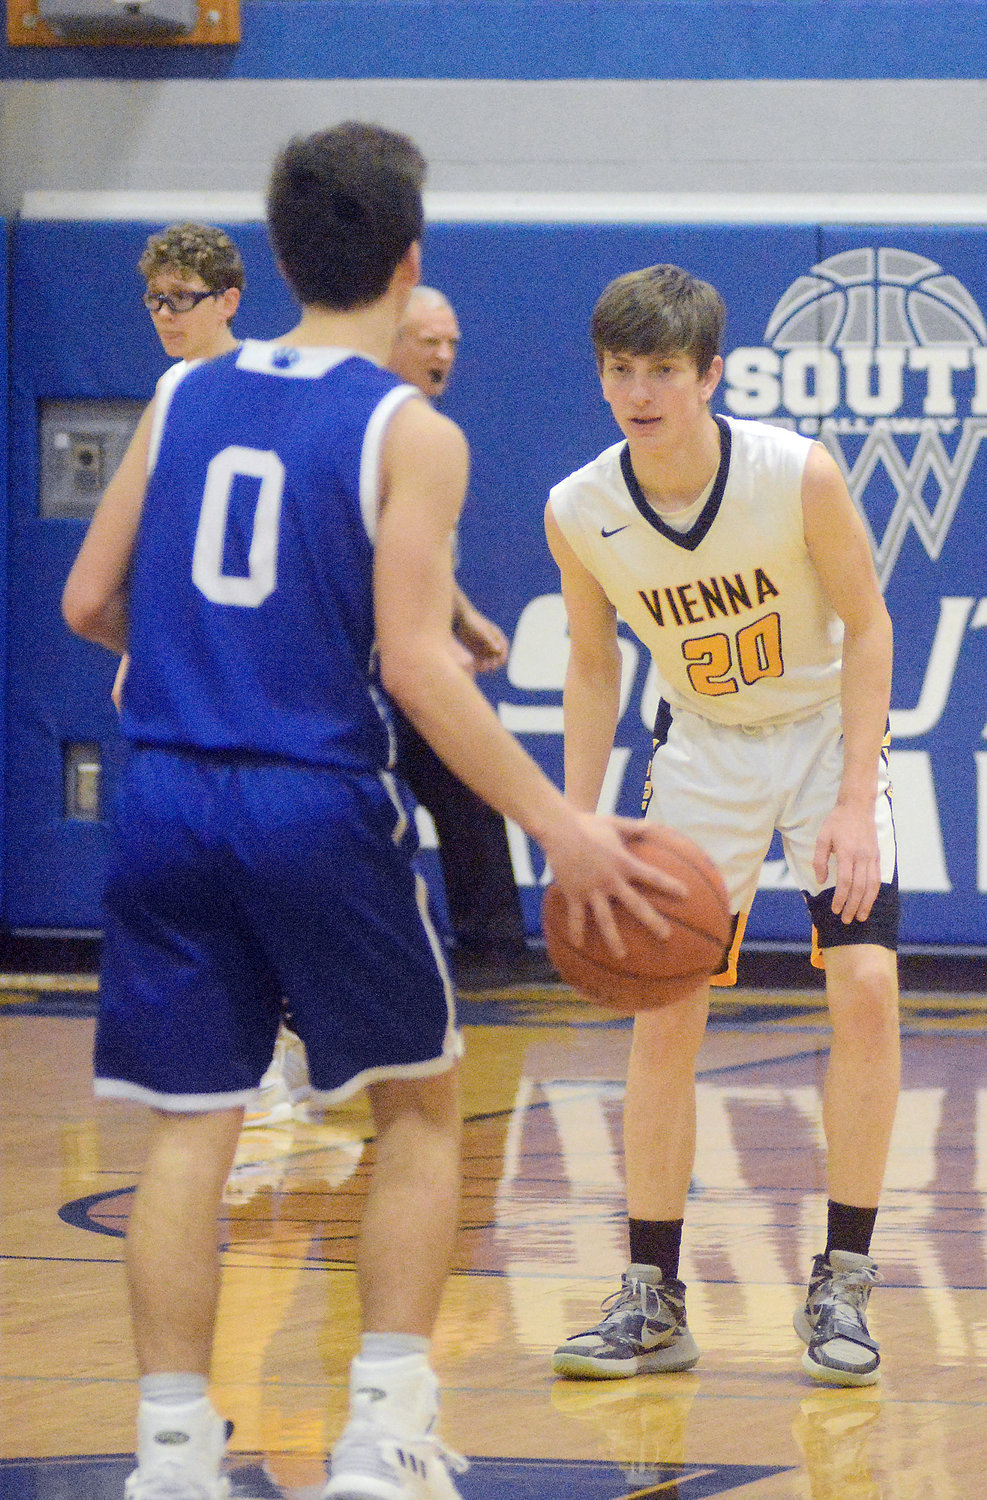 Cash Stricklan (far right) stares down Hermann’s Connor Coffey while playing defense for Vienna’s Eagles during their 58-48 victory Friday night in the championship game of the South Callaway Boys Basketball Tournament. The game was moved up to Friday instead of Saturday as originally scheduled to beat winter weather that hit the area early Saturday morning.